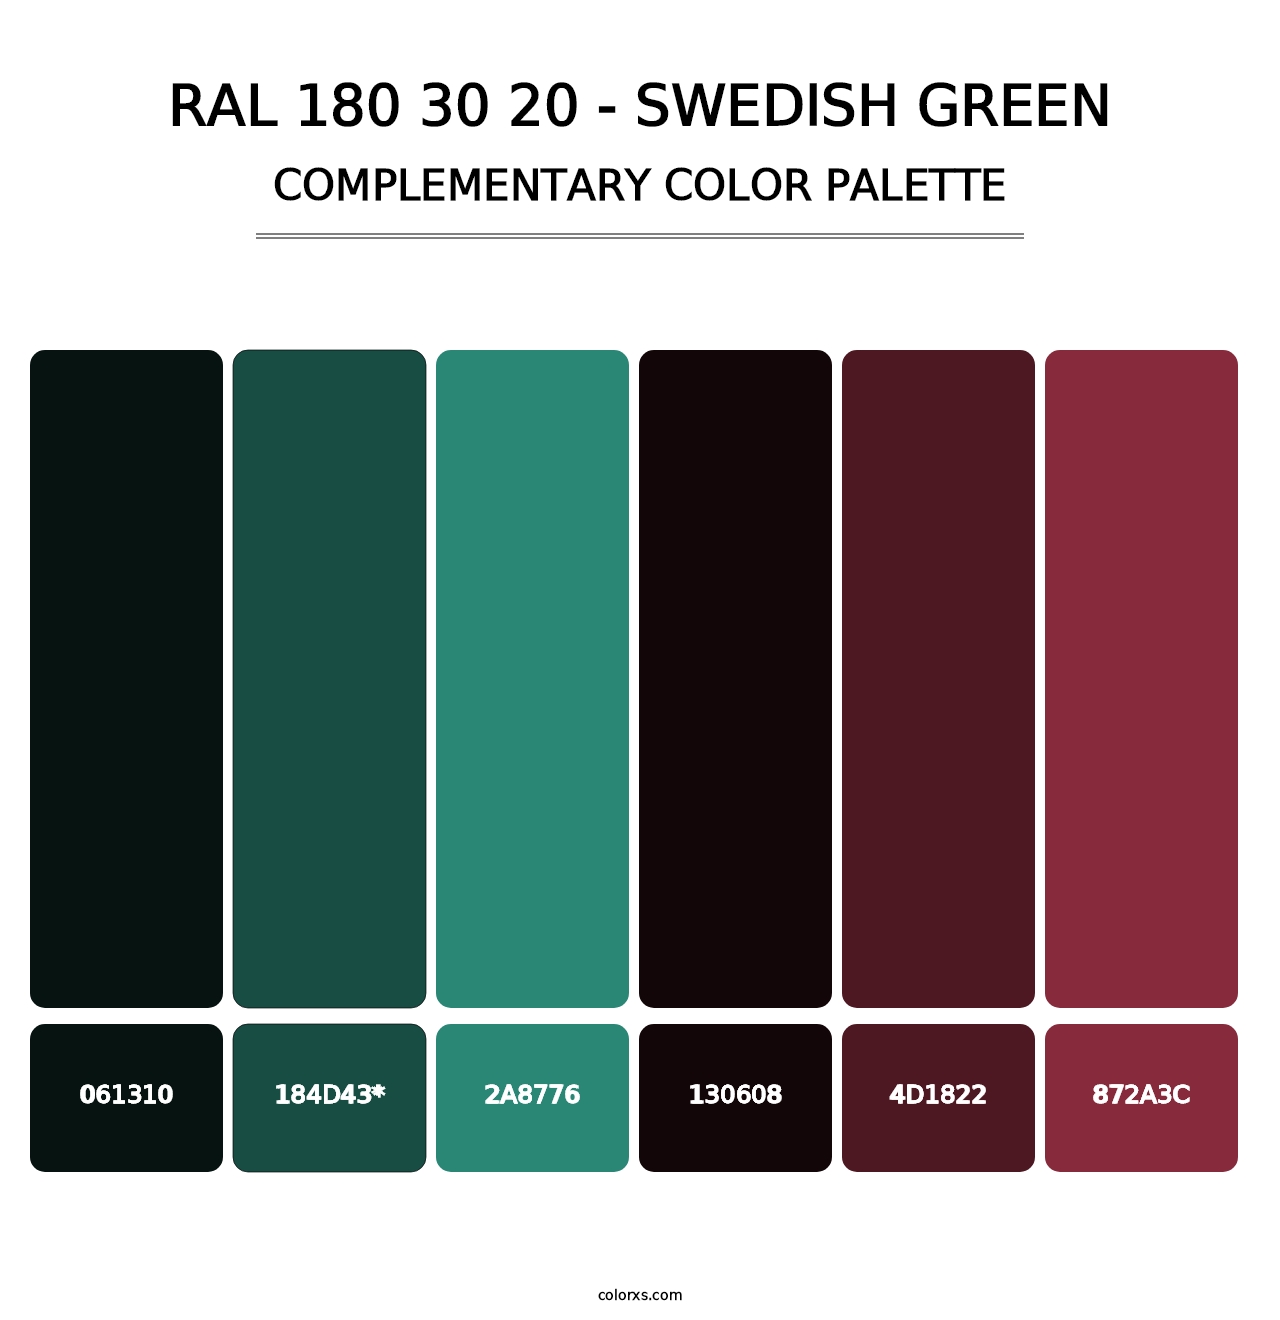 RAL 180 30 20 - Swedish Green - Complementary Color Palette